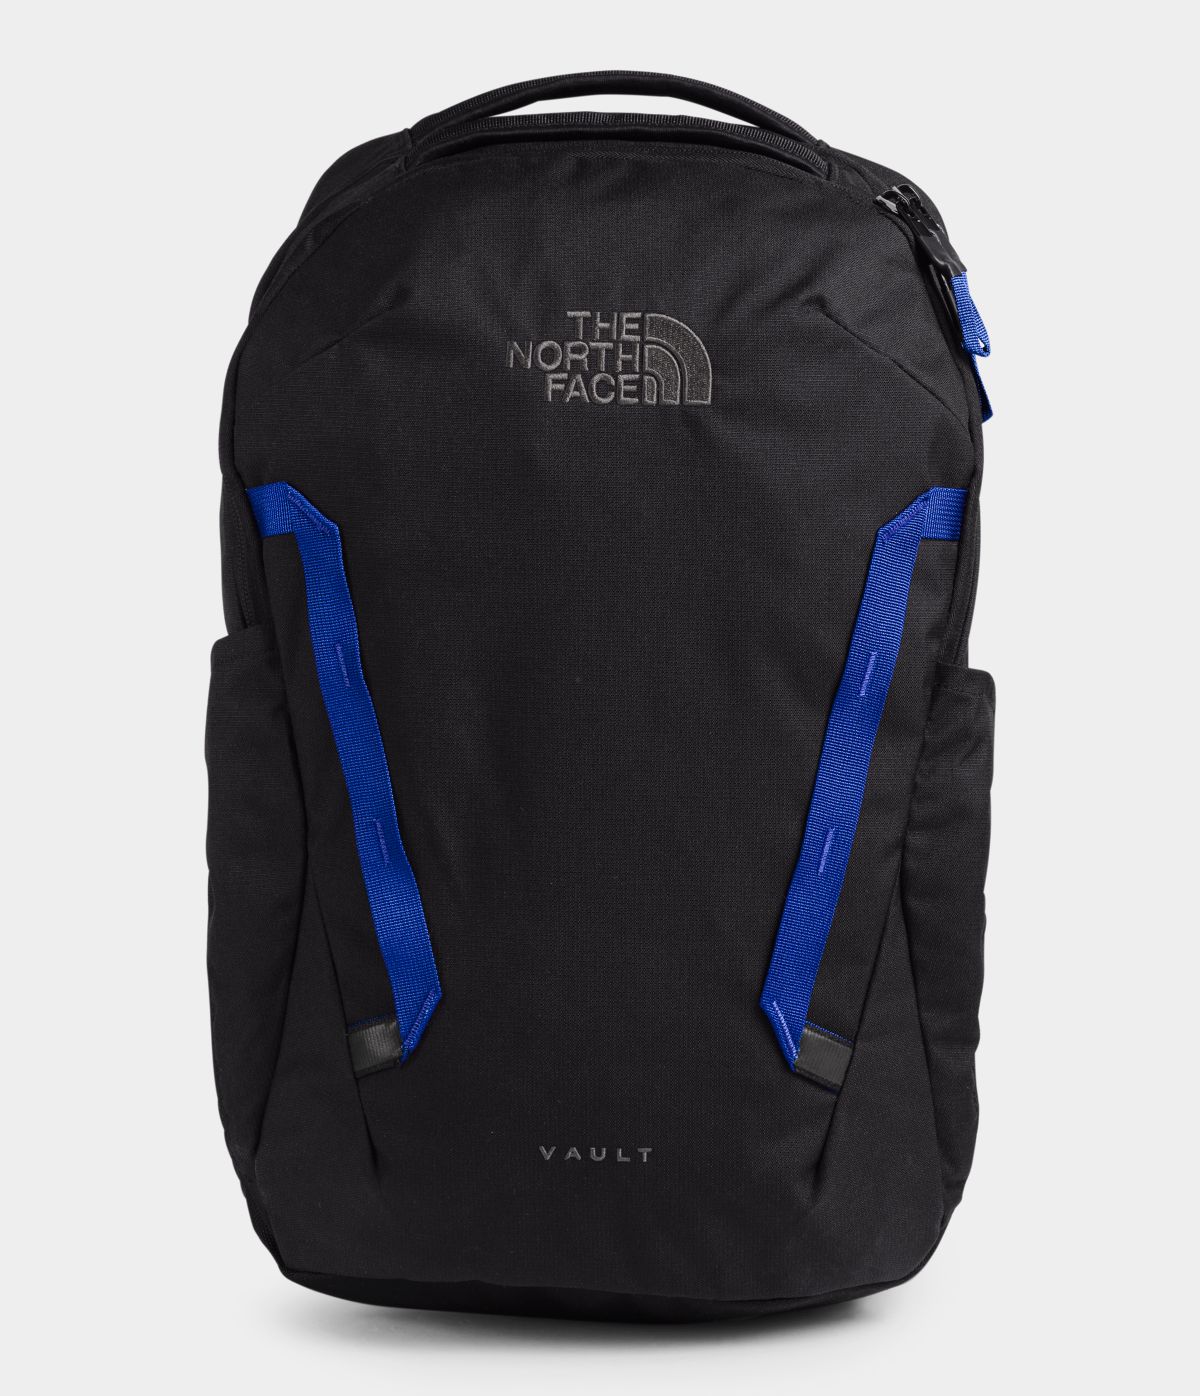 Unisex The North Face Vault Backpack in TNF Black Heather/TNF Blue from front view